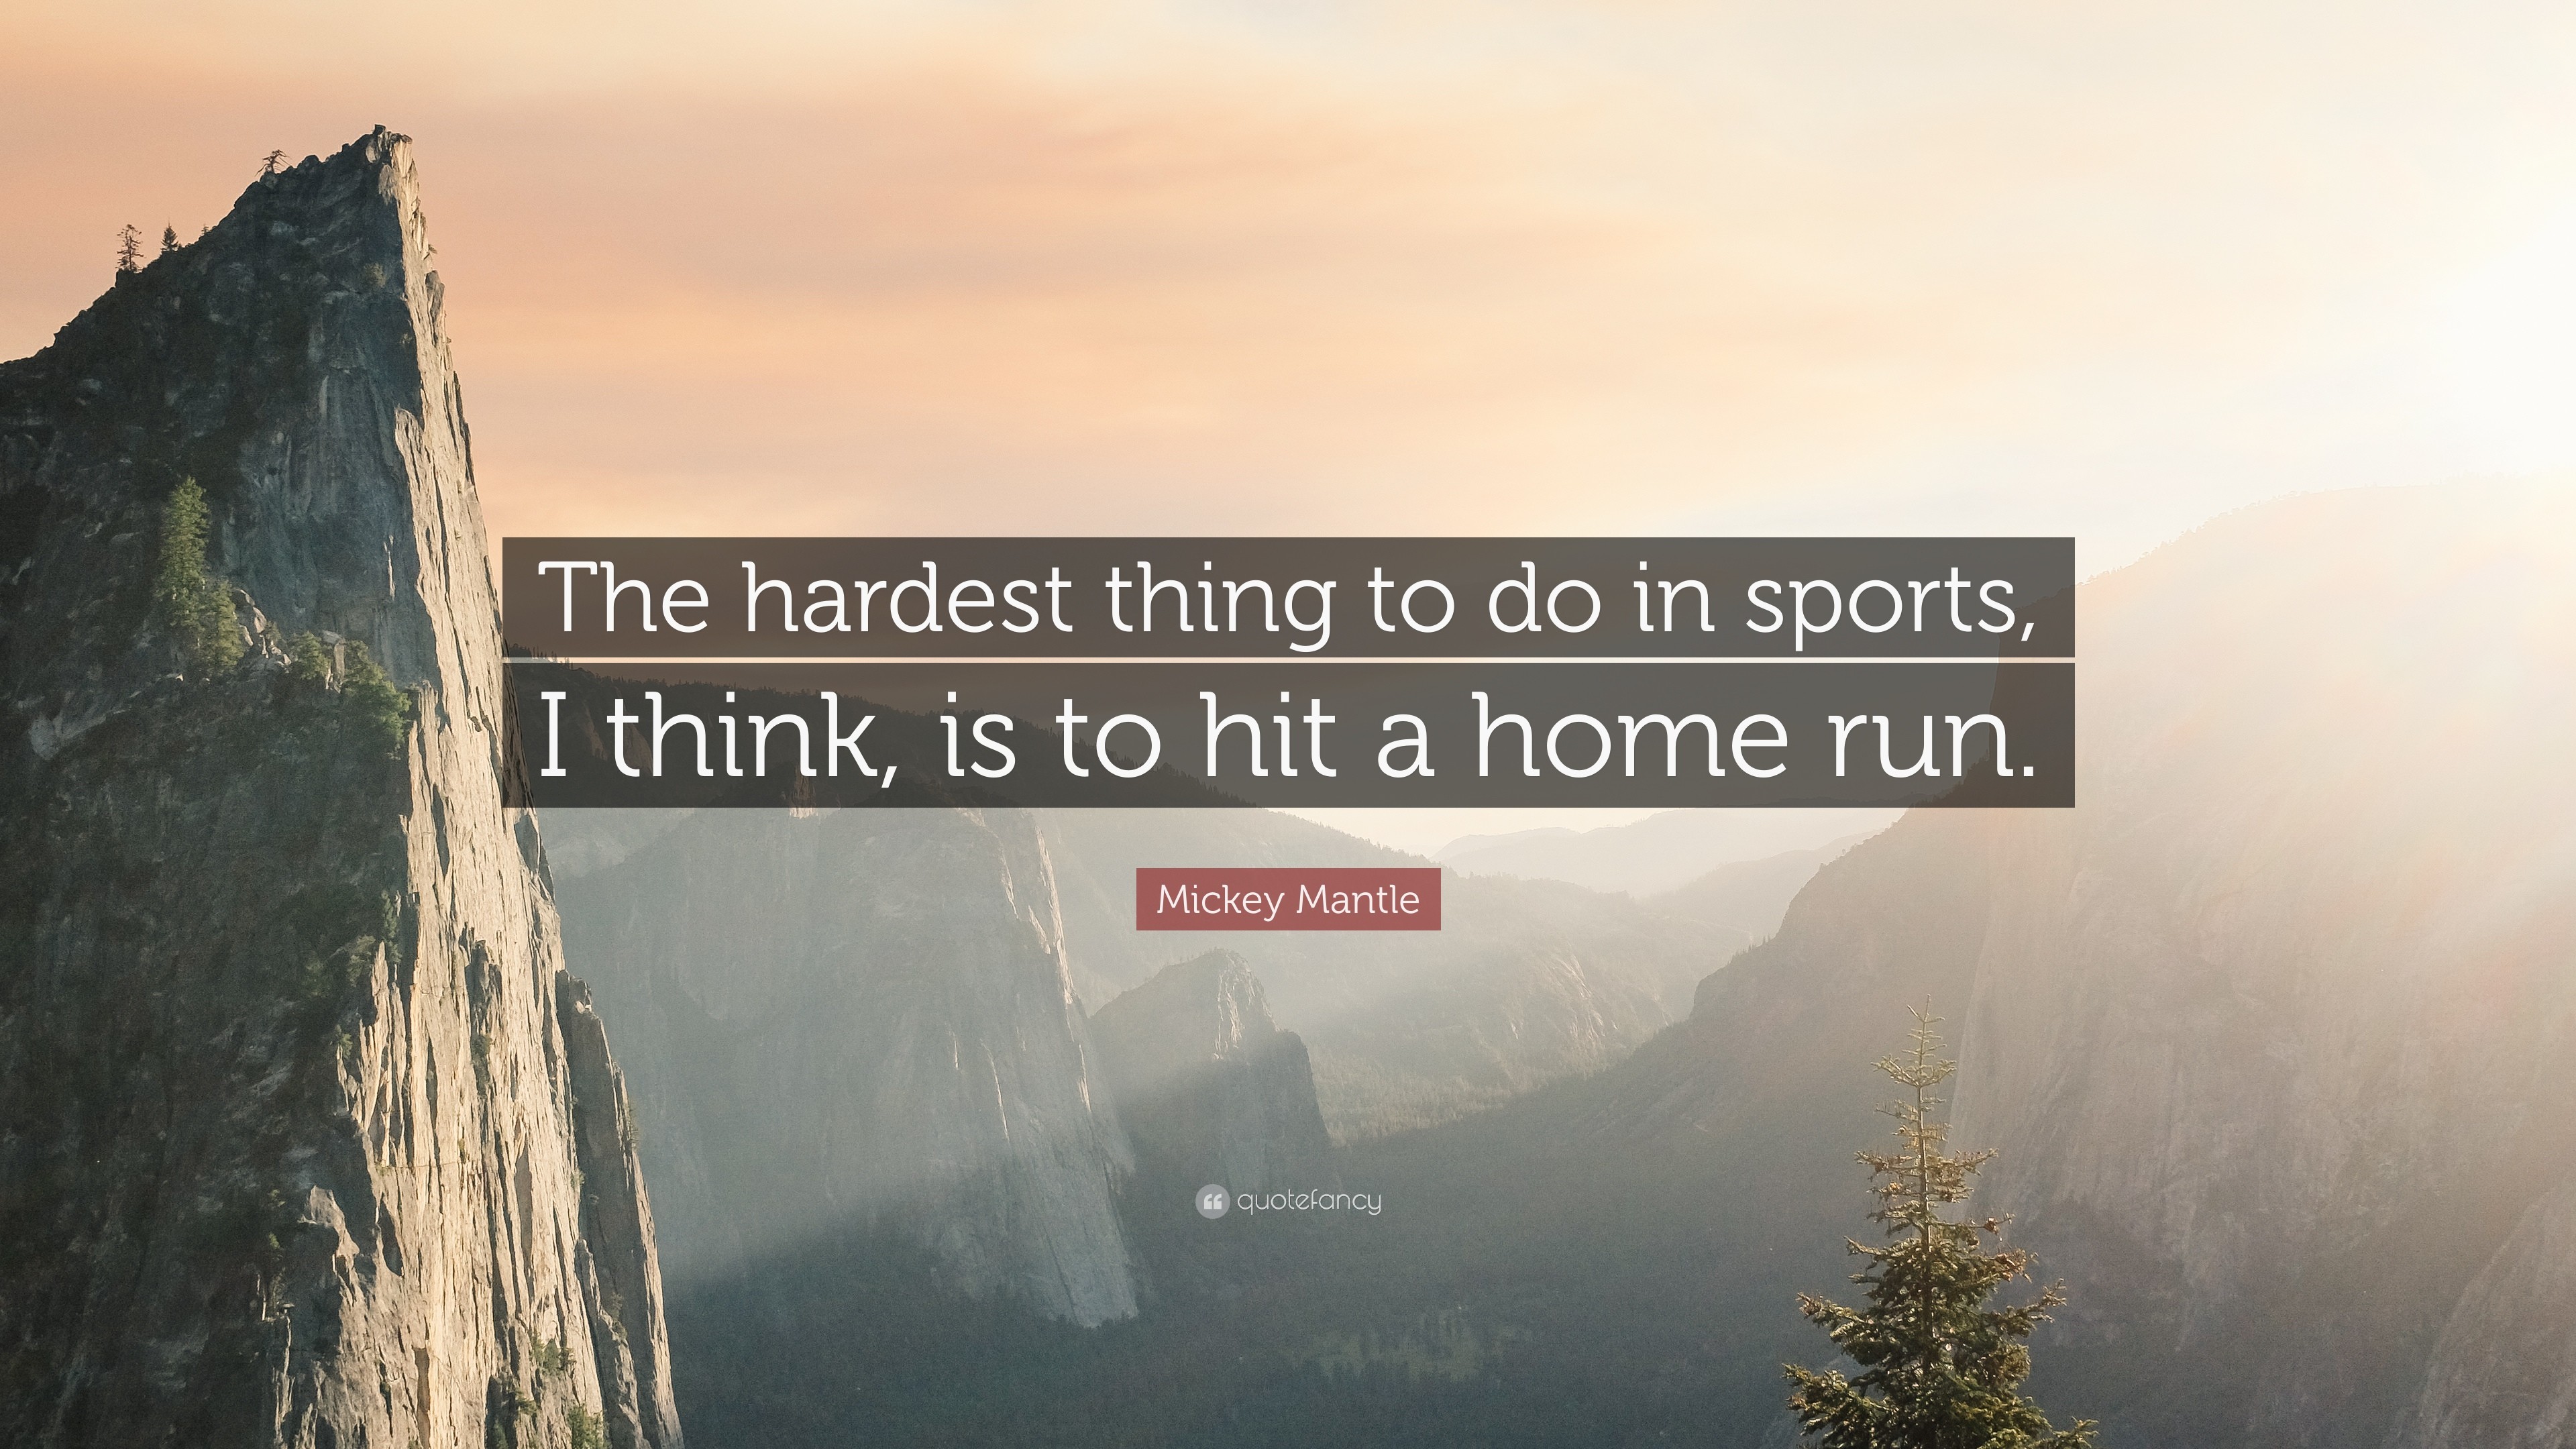 Mickey Mantle Quote The hardest thing to do in sports, I think,